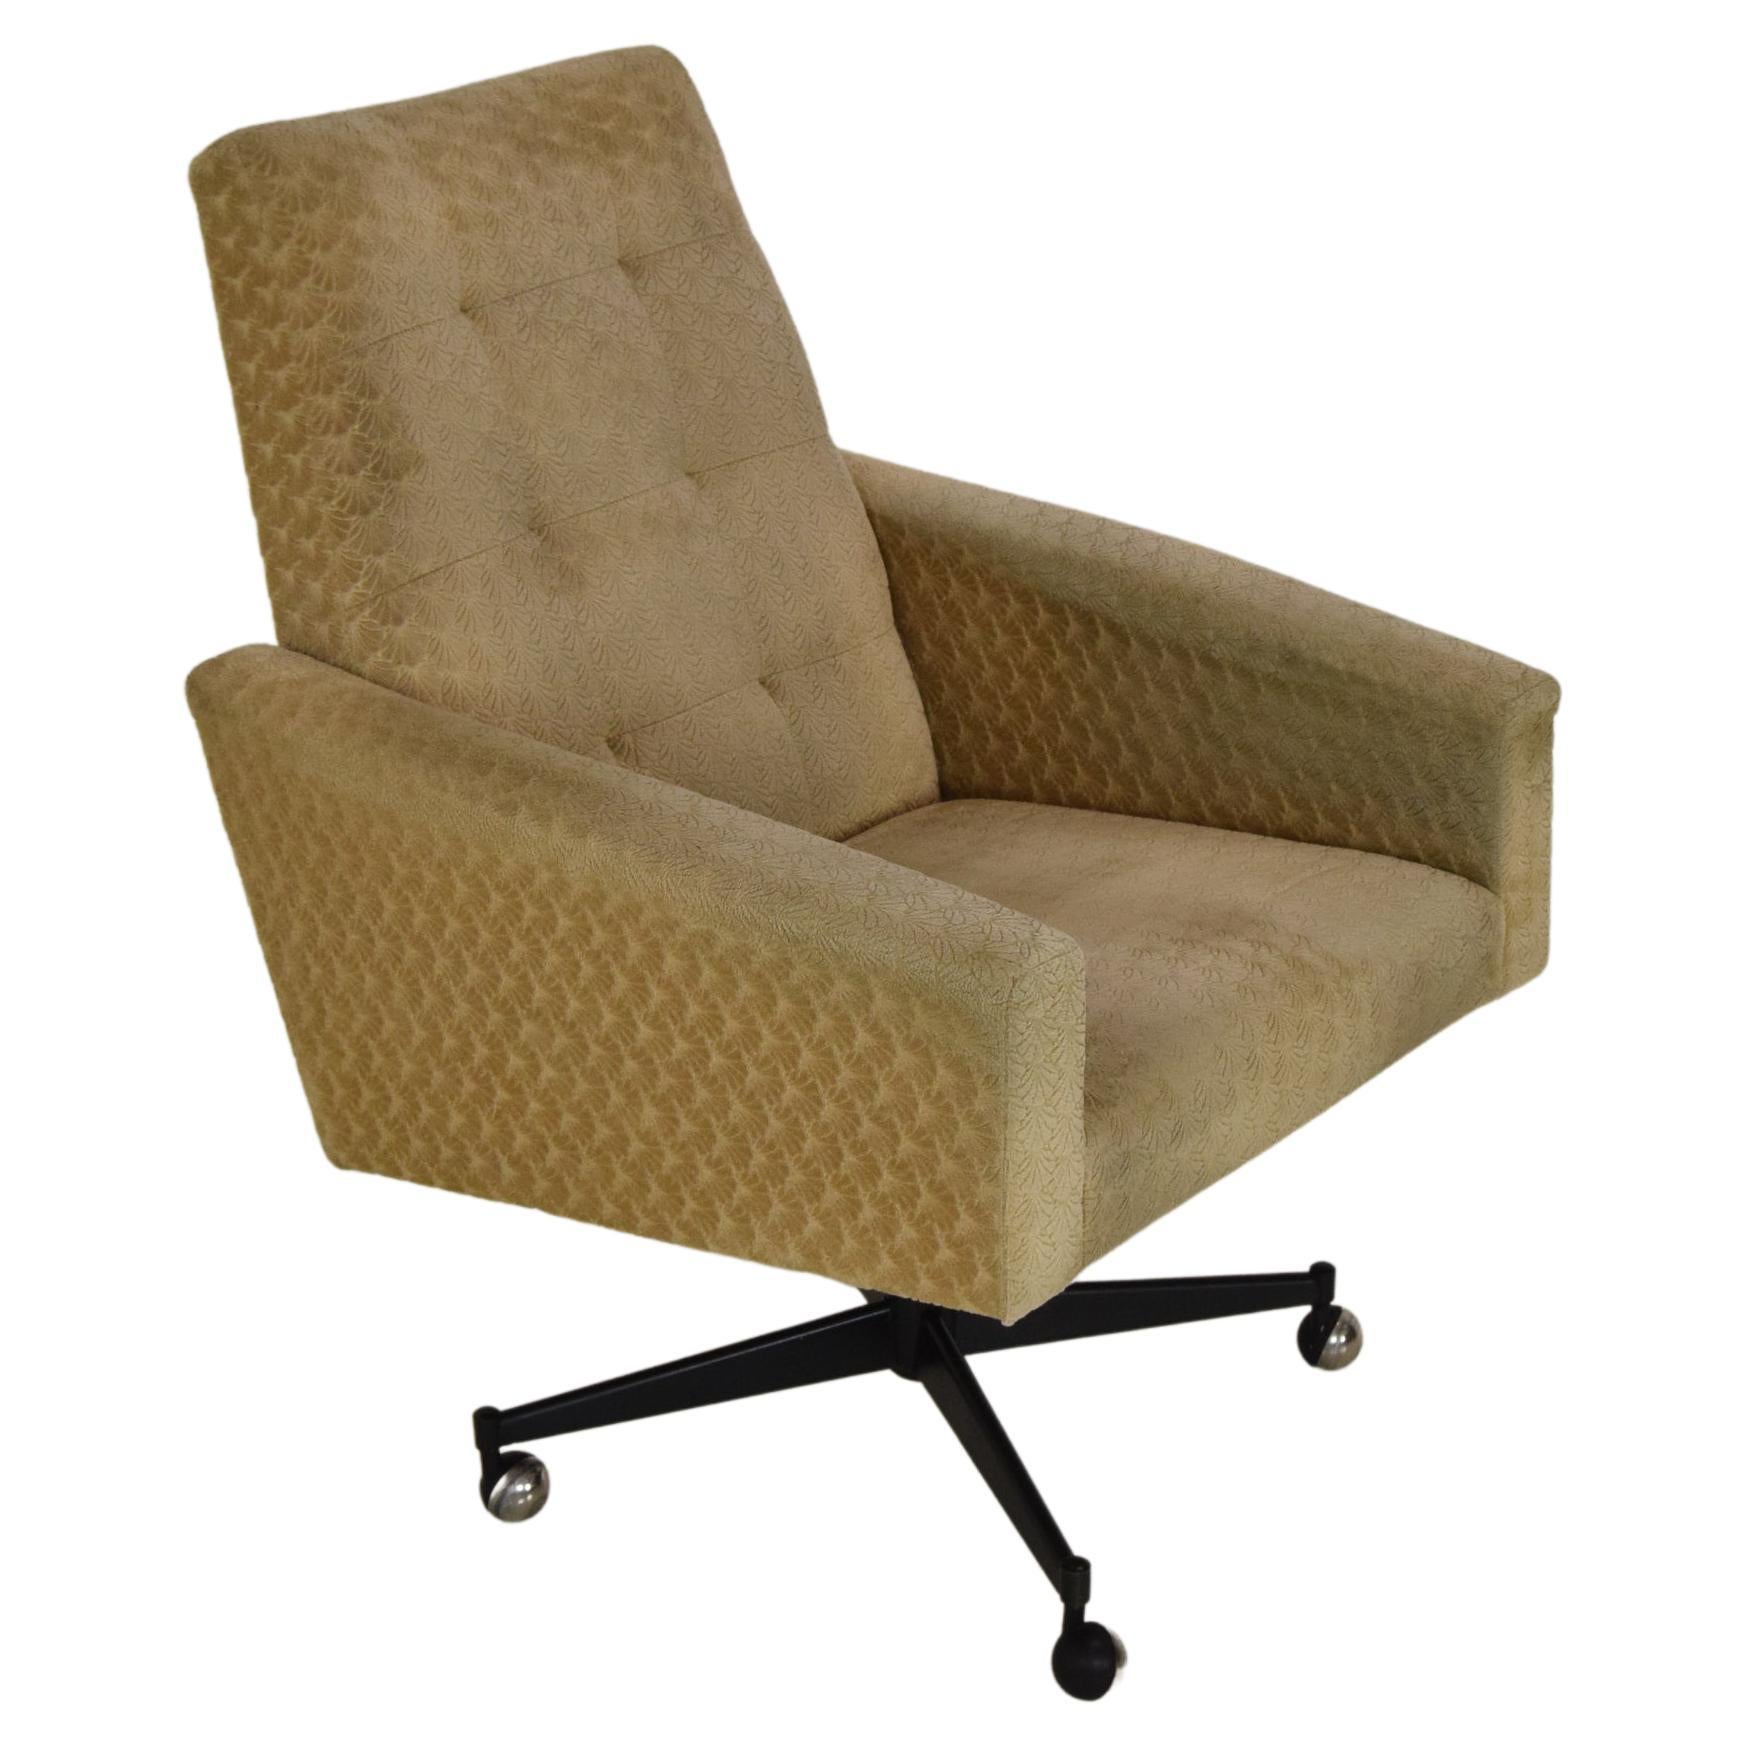 Midcentury Swivel Armchair with Wheels, 1970s For Sale